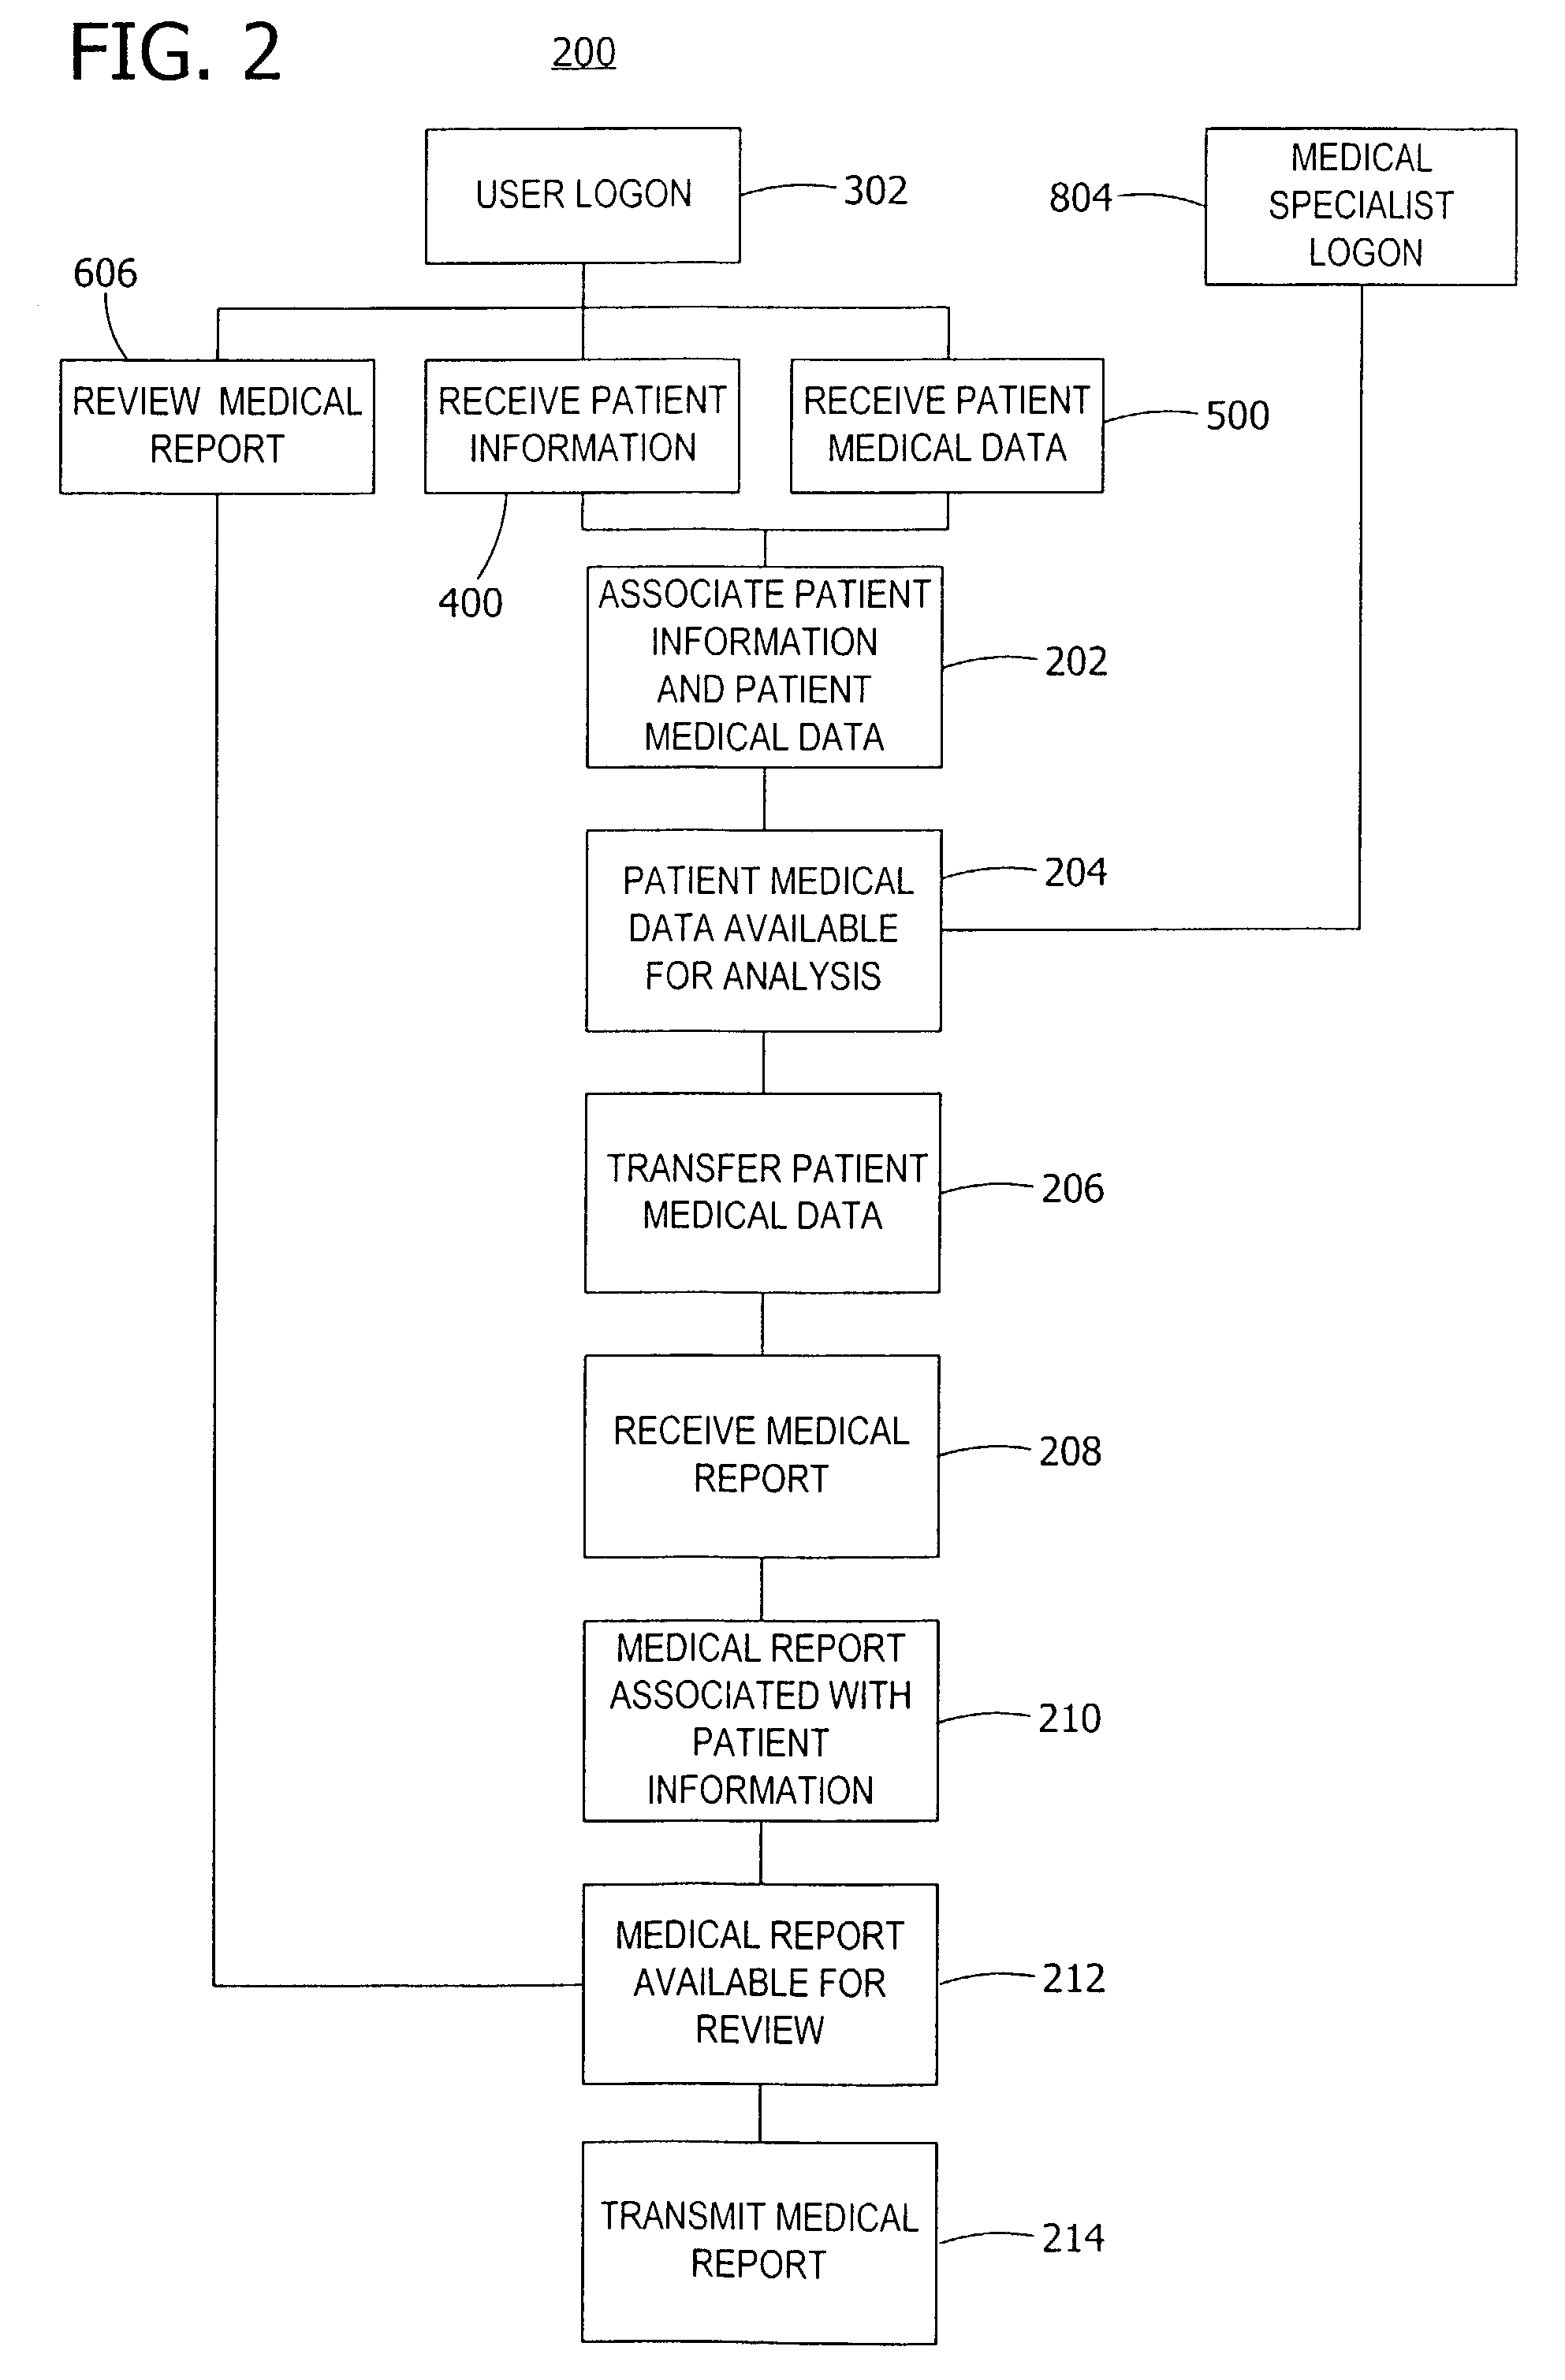 System and method for handling the acquisition and analysis of medical data over a network